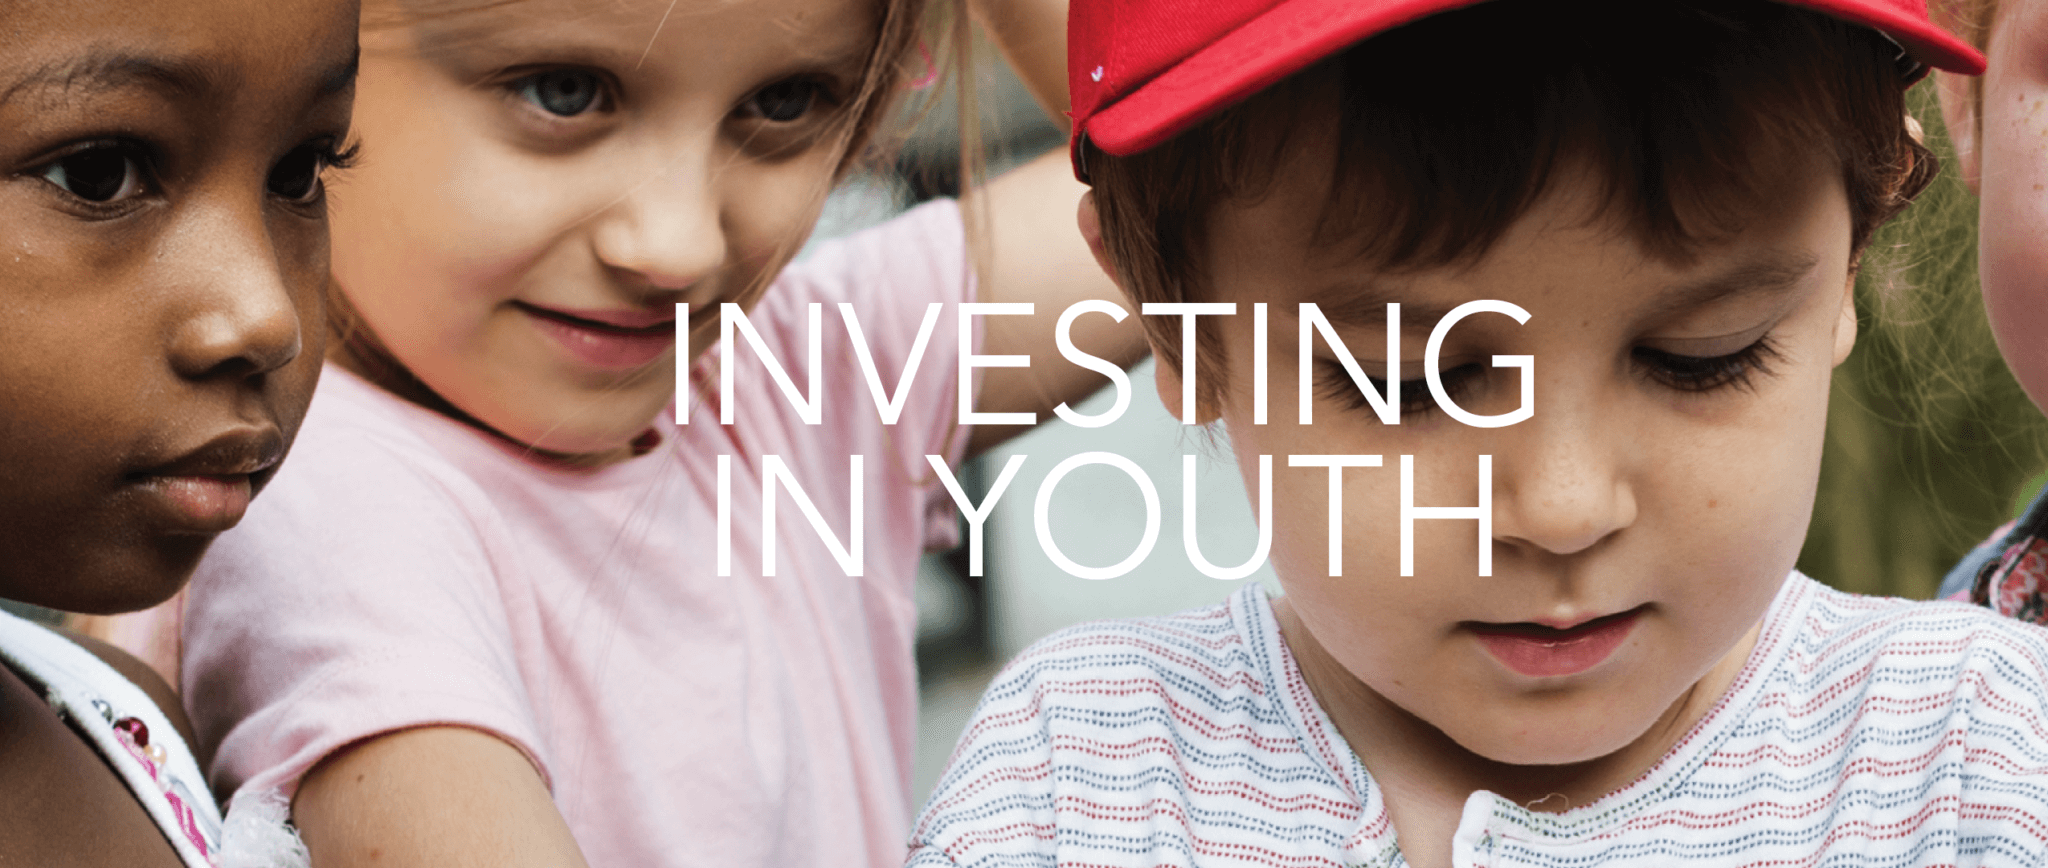 investing in youth